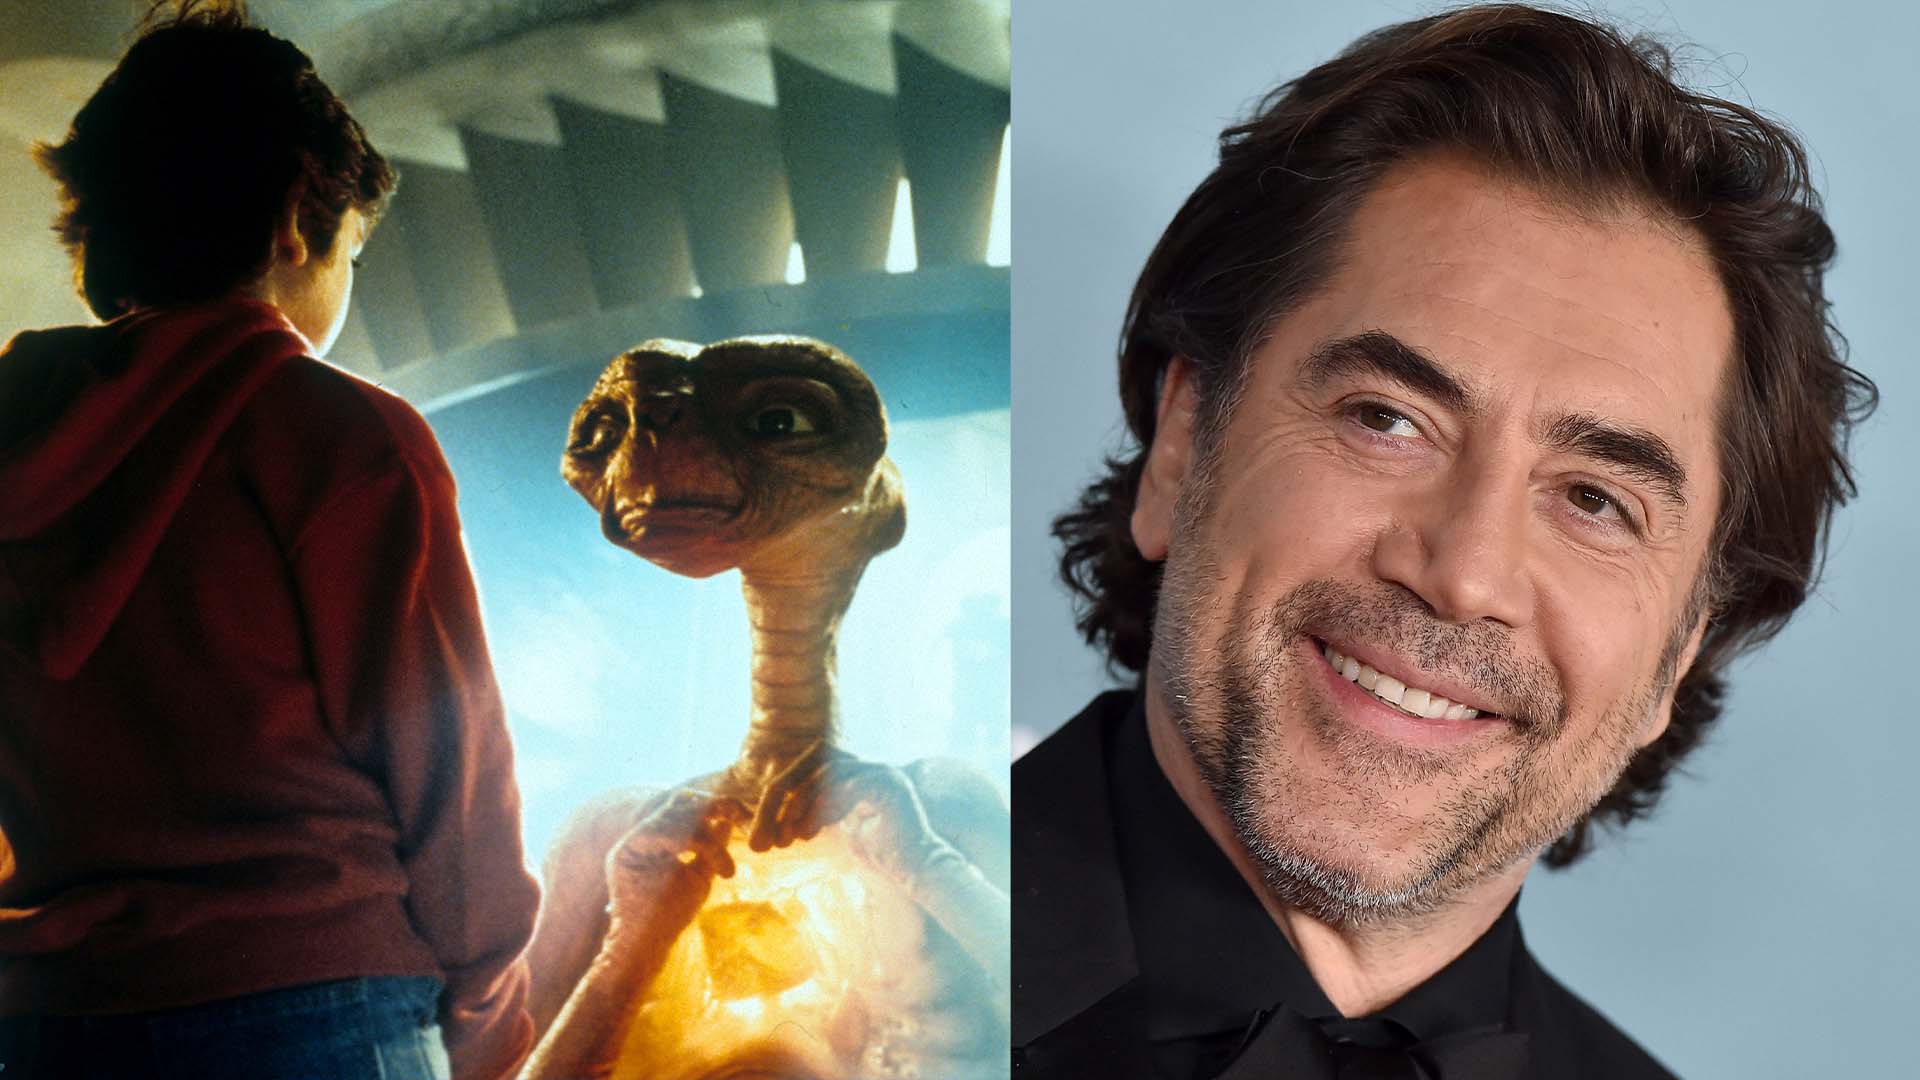 Actor Javier Bardem admits his first childhood movie crush was E.T. The Extra-terrestrial